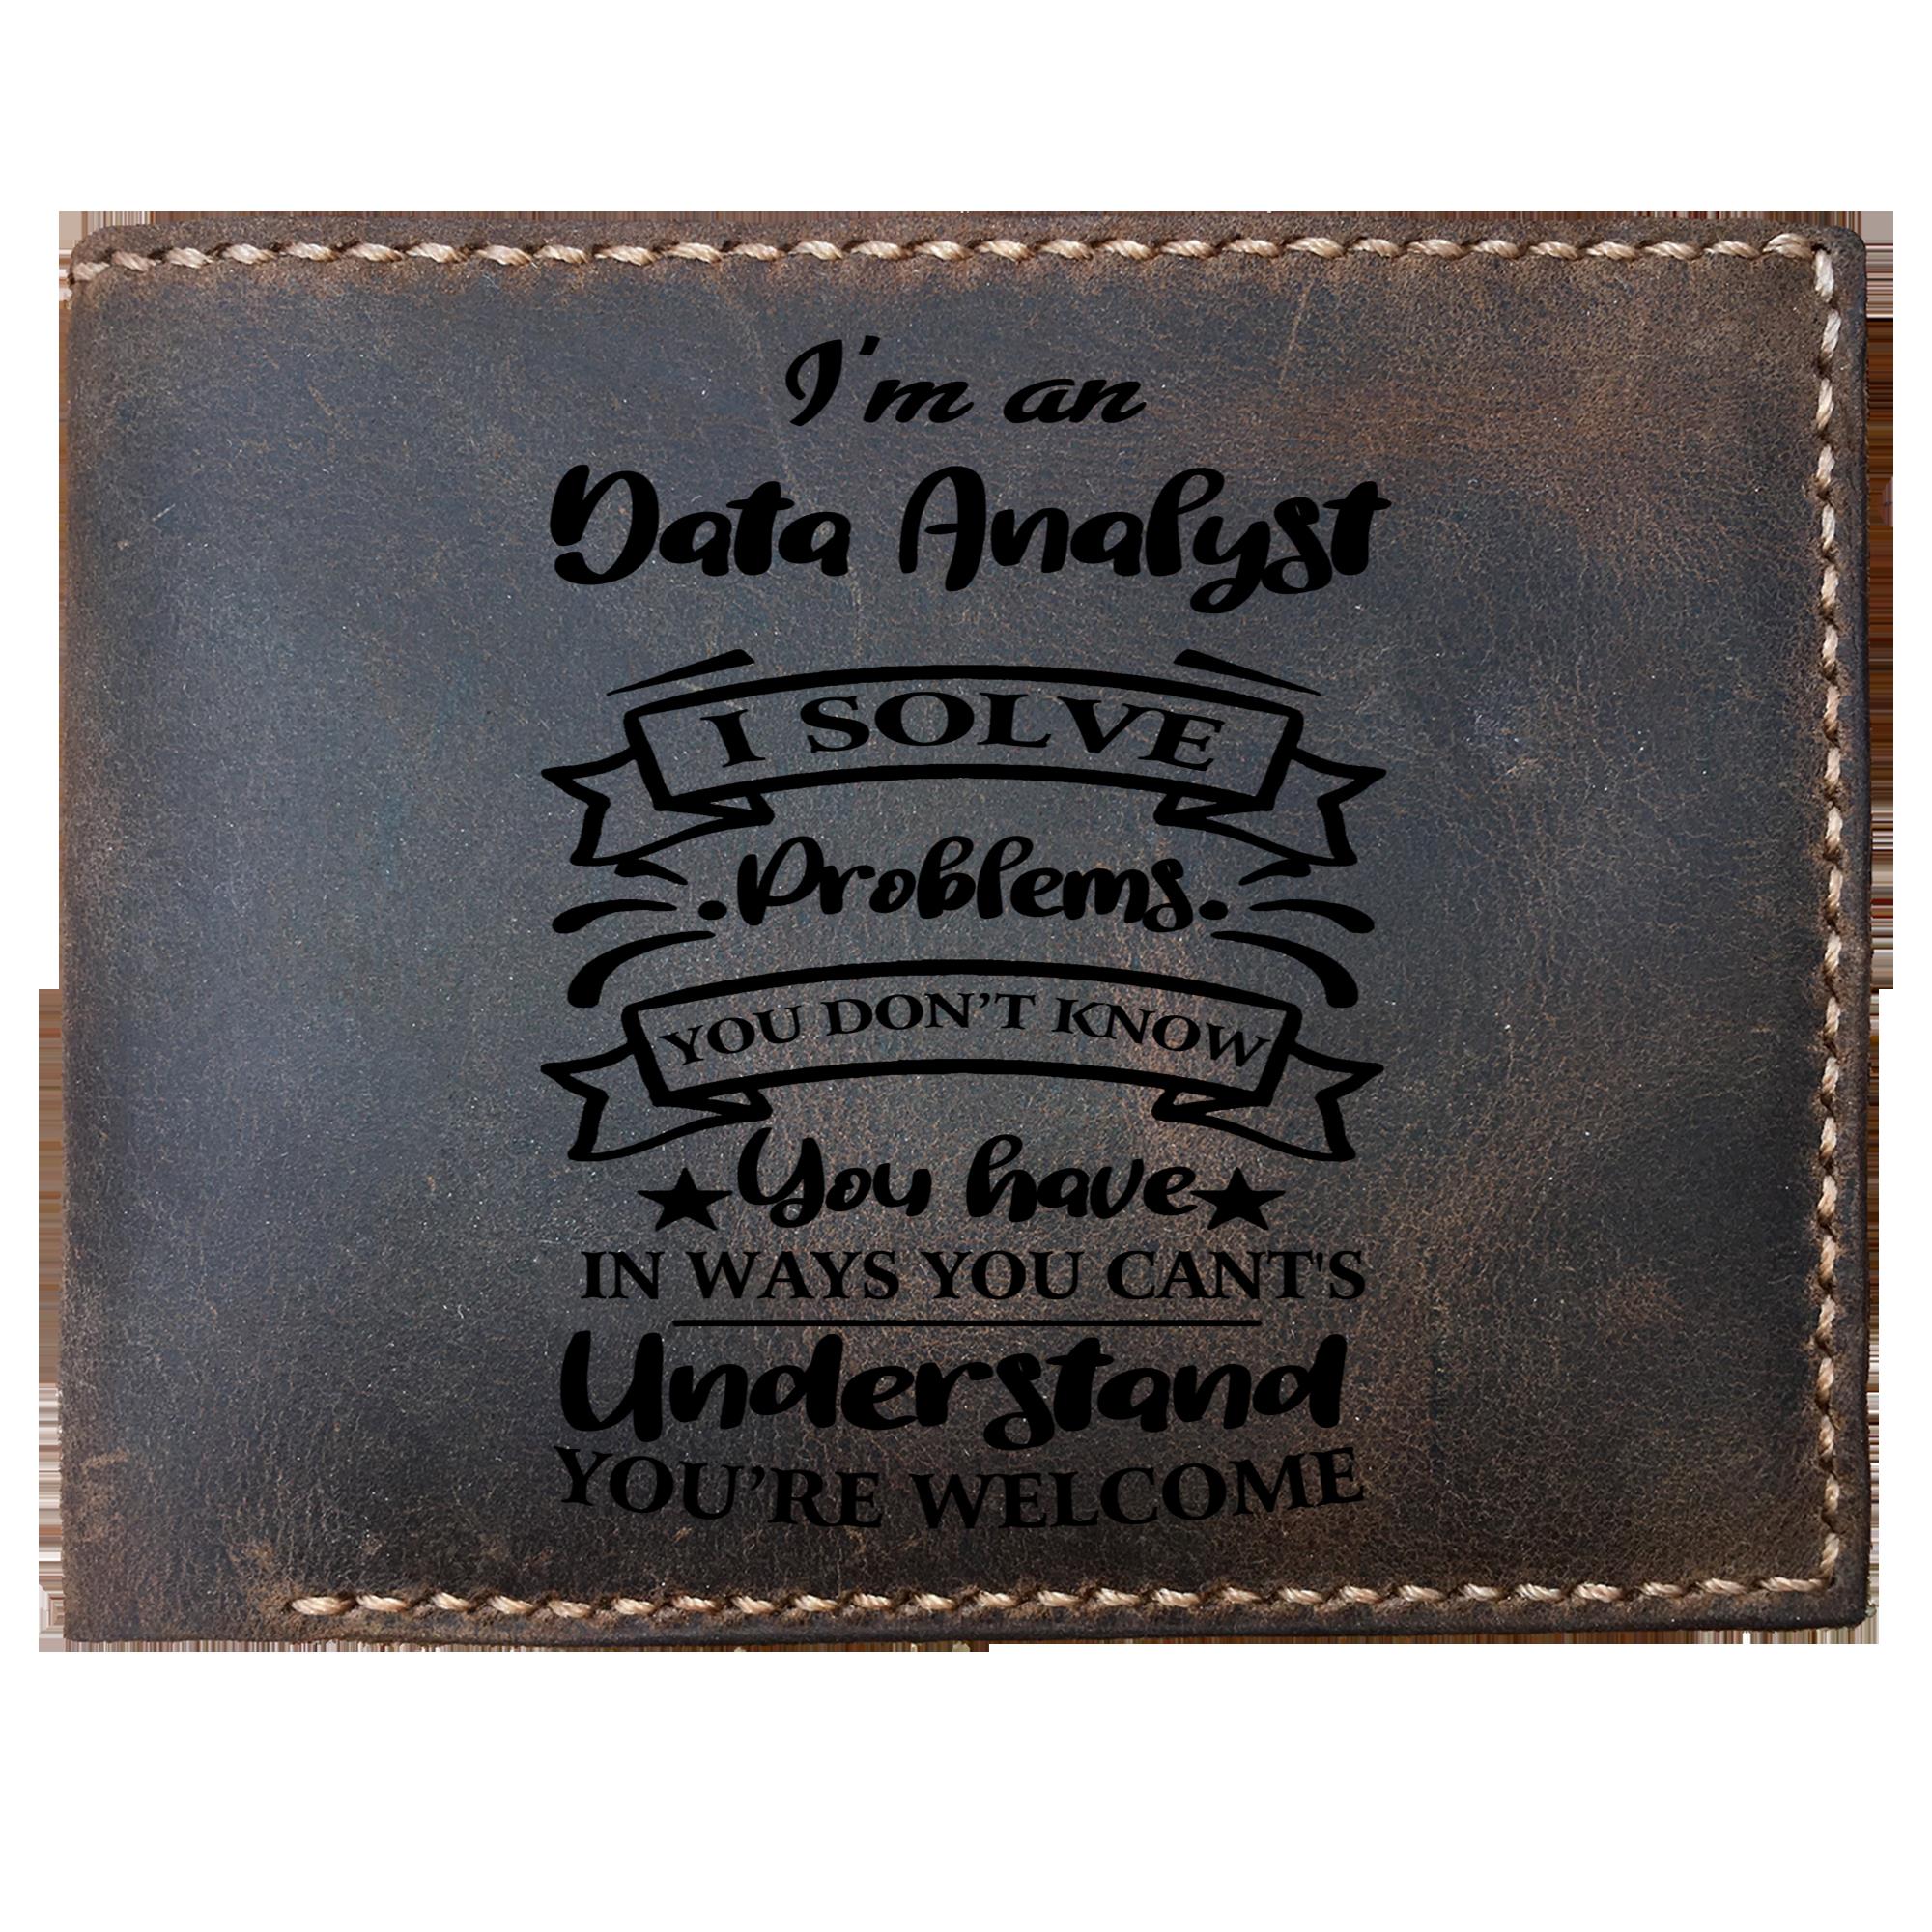 Skitongifts Funny Custom Laser Engraved Bifold Leather Wallet For Men, I'm an Data Analyst Solve Problems, Father's Day Gifts